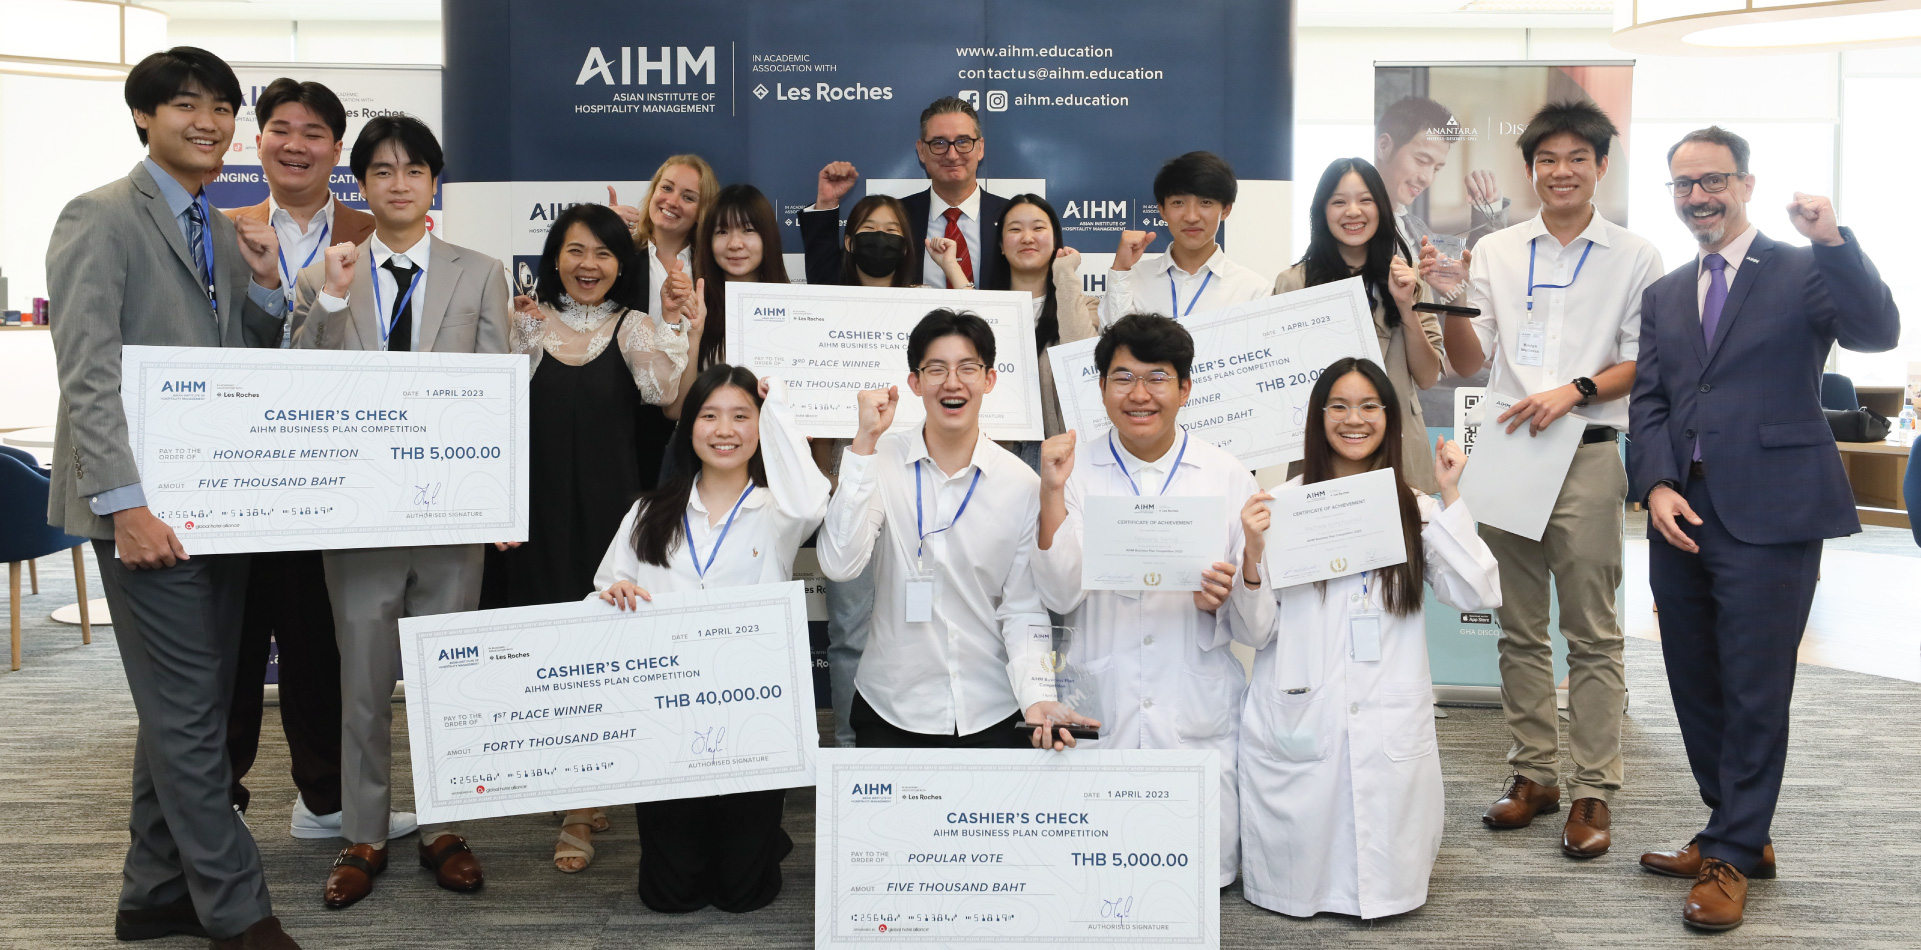 AIHM-business-plan-competition